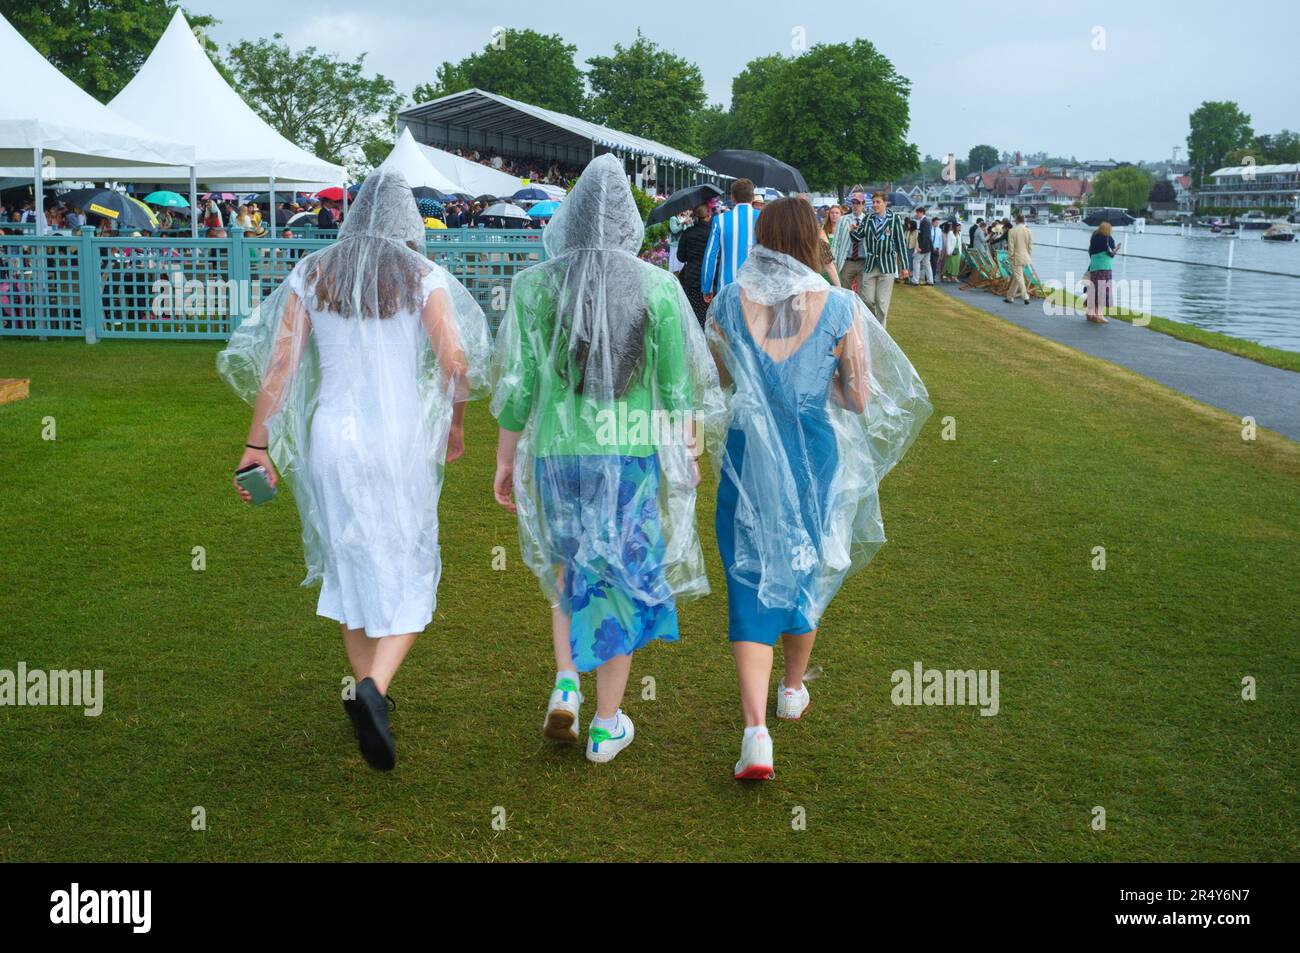 Three young women keep the rain off with transparent plastic parkas in the Regatta enclosure  at Henley Royal Regatta, Henley-on-Thames, 2022 Stock Photo